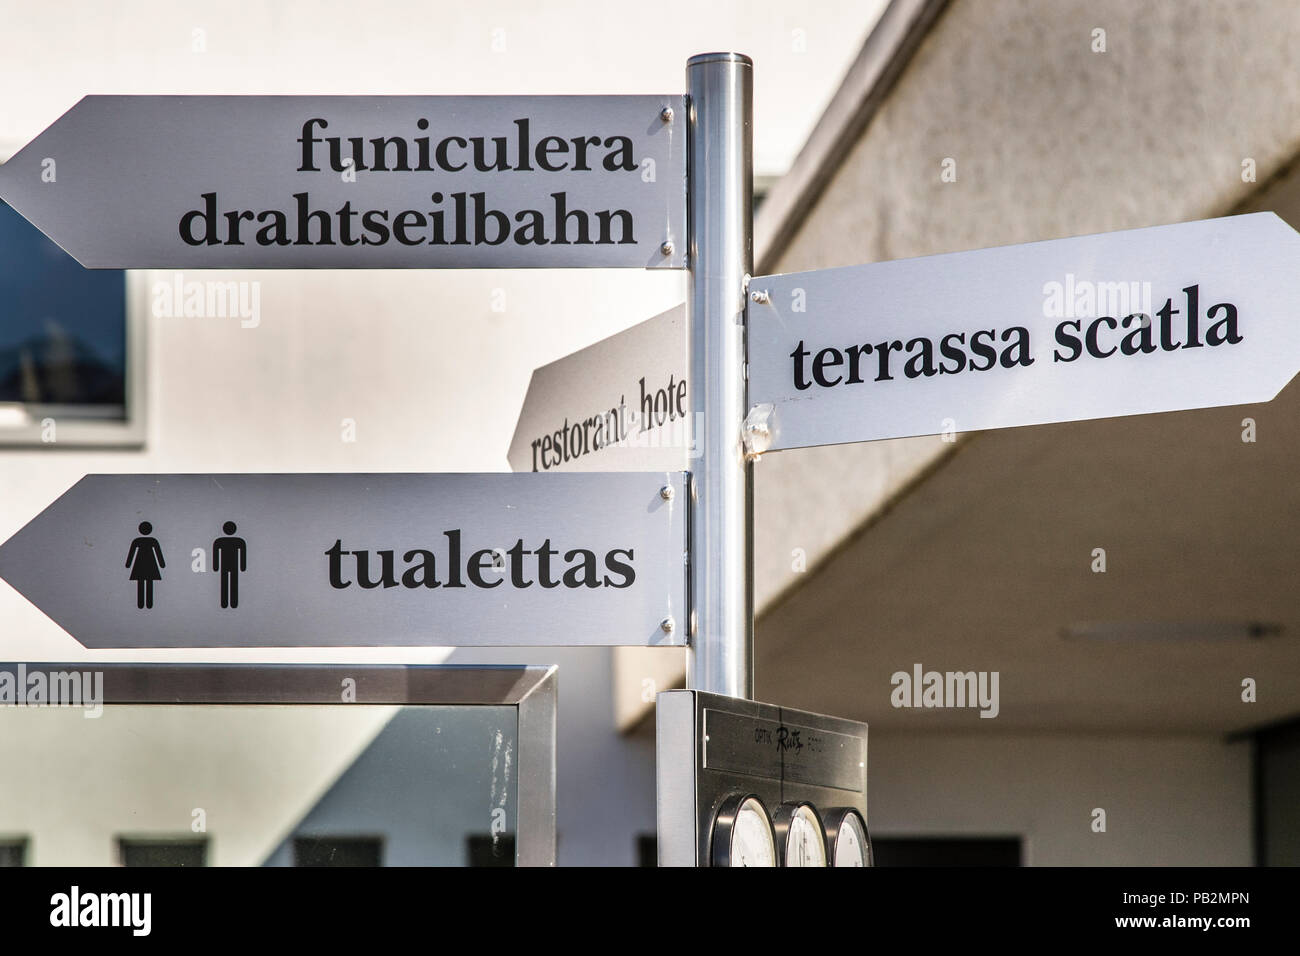 In Switzerland, Romansh, which is spoken by only a few people, is also an important language. Direction Signs in Rhaeto-Romanic Language on Top of Muottas Muragl, Switzerland Stock Photo